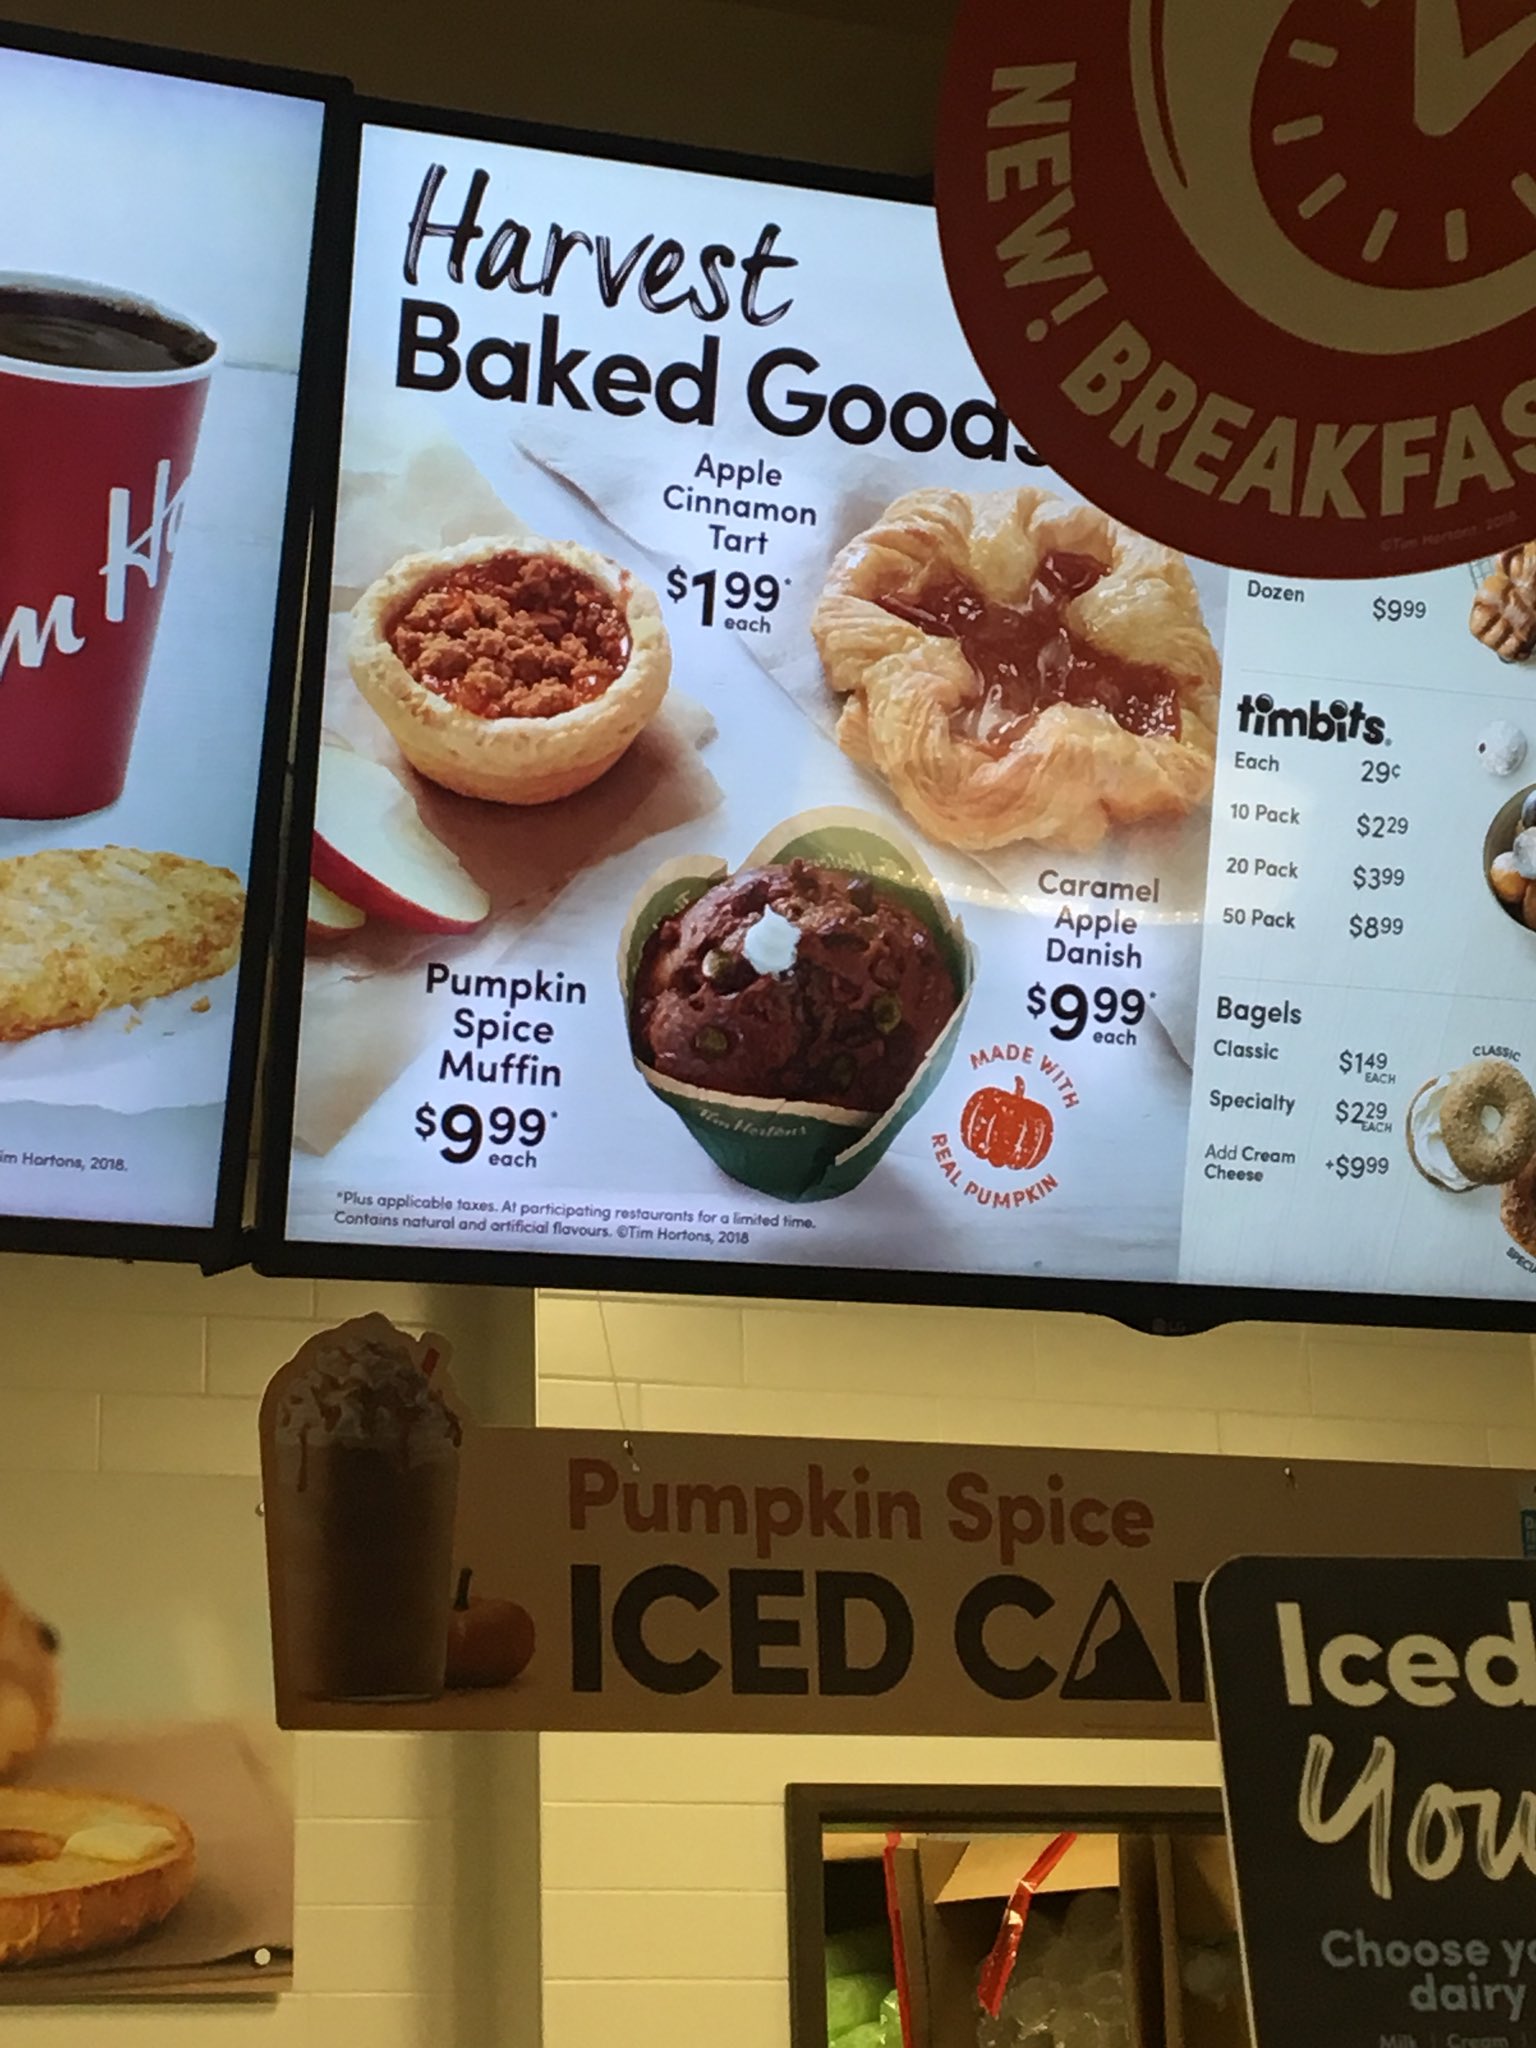 Jessica on Twitter: price increase much? 😂 sign needs some attention, or I need a raise so I can afford cream cheese and a muffin! https://t.co/Qlj6ZEISA4" / Twitter